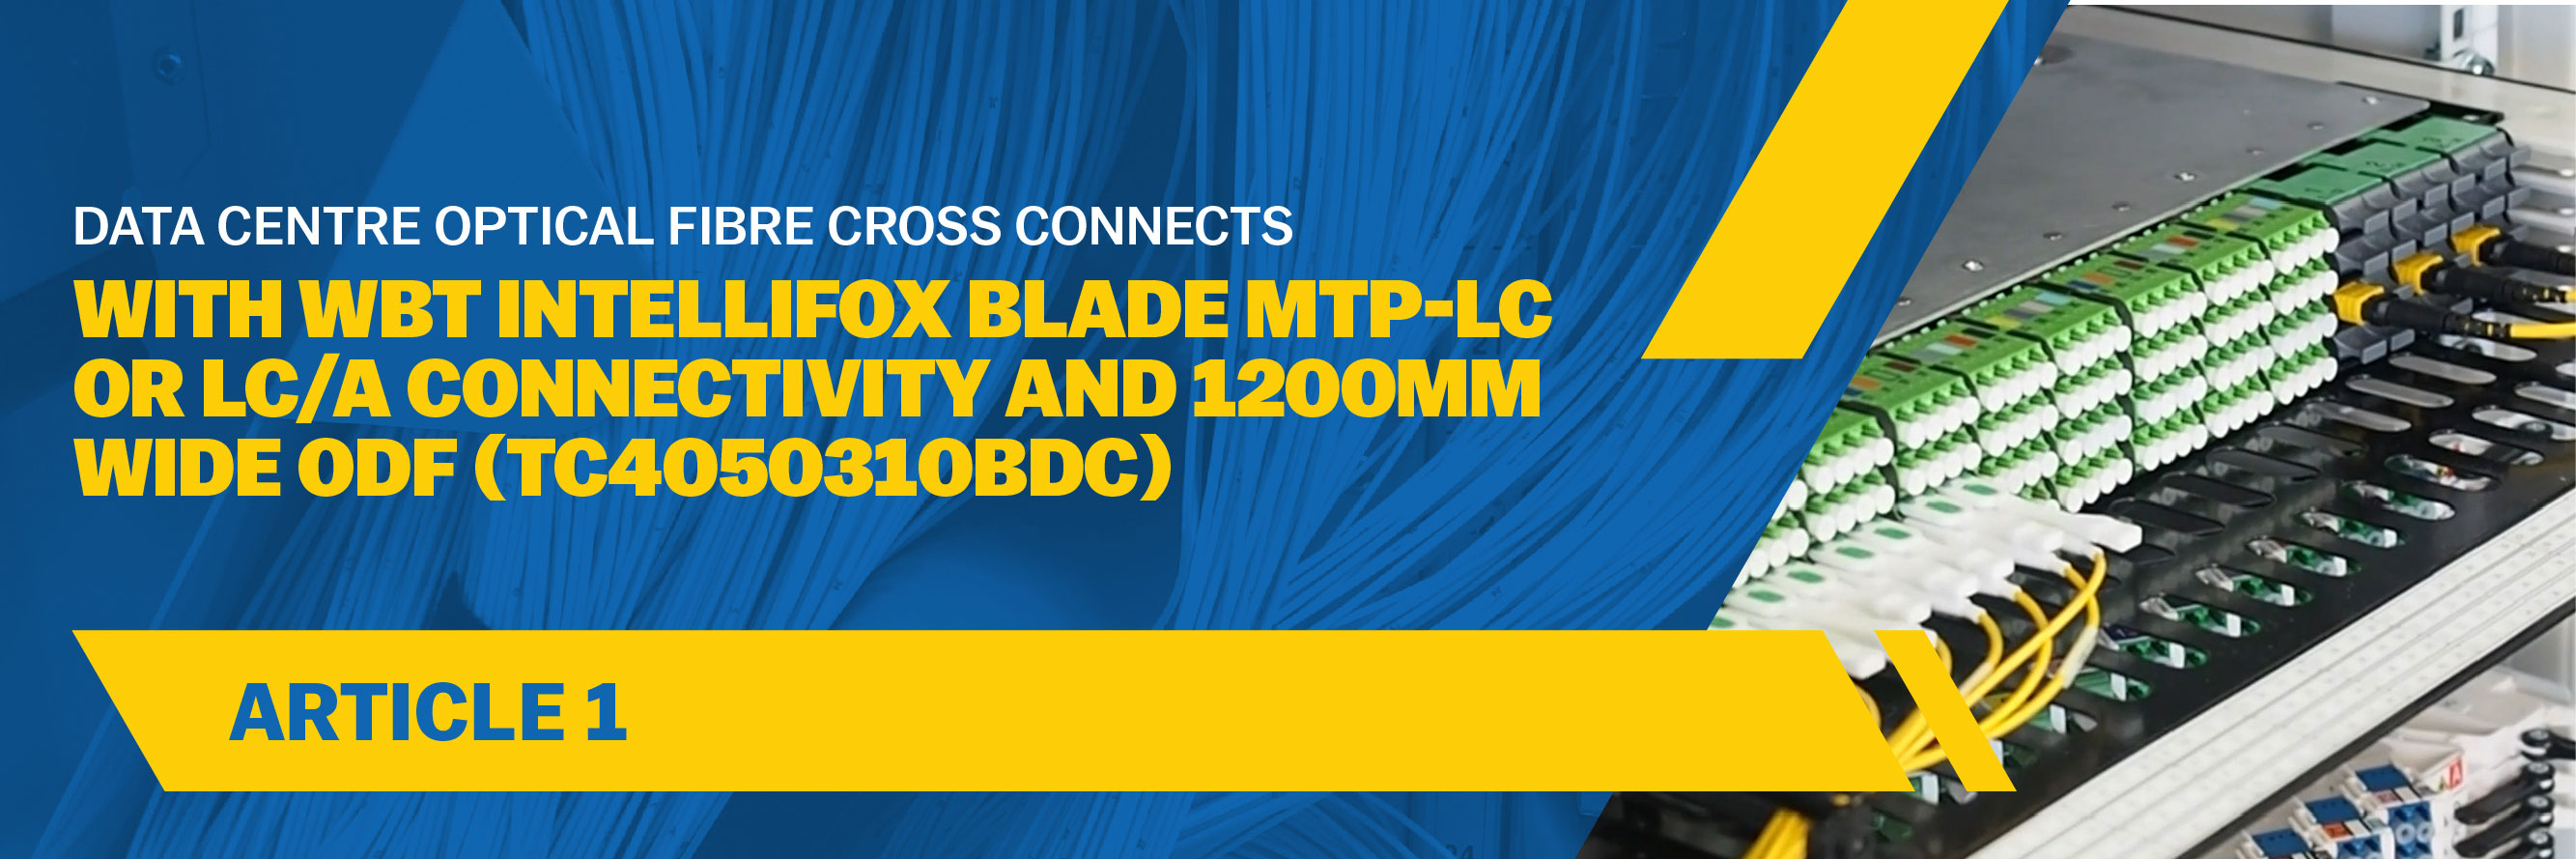 Data Centre optical fibre cross connects with WBT IntelliFOX Blade MTP-LC or LC/A connectivity and 1200mm wide ODF (TC4050310BDC)